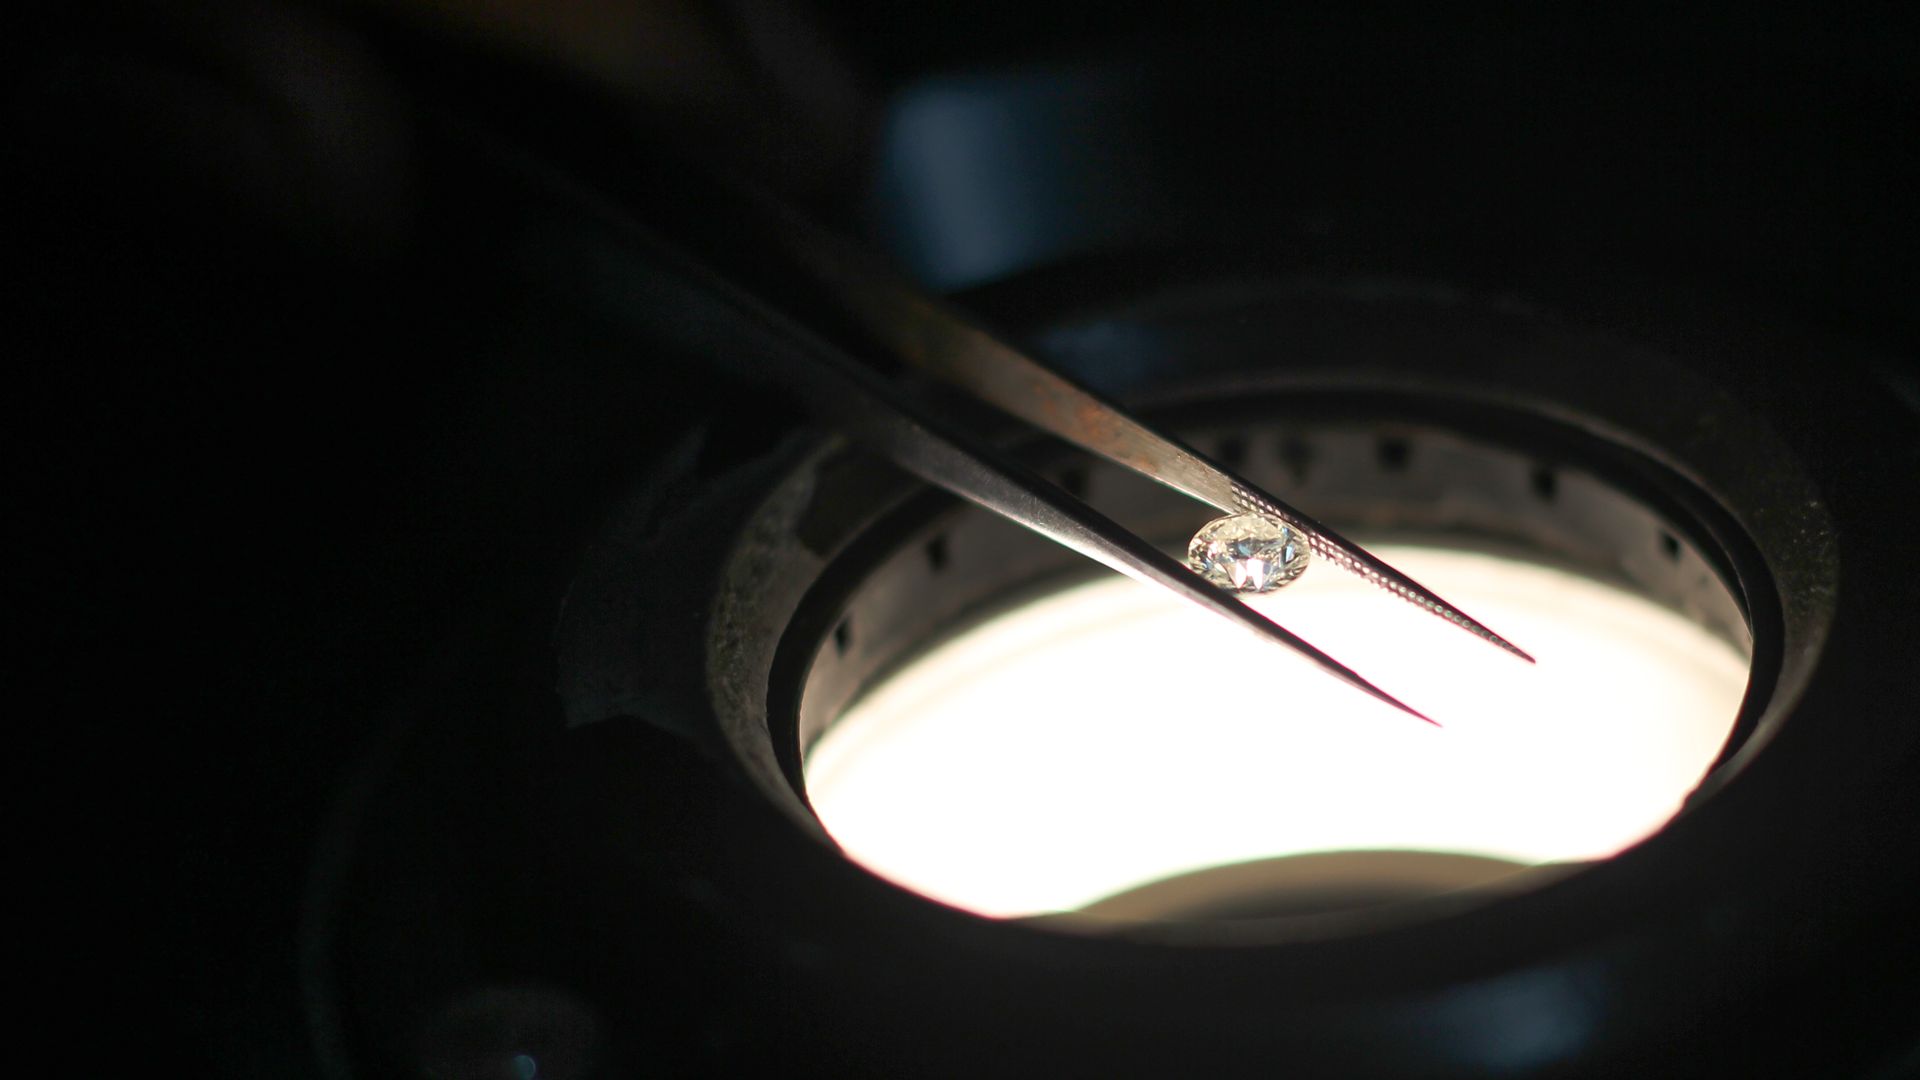 In this image, a small diamond is held between two long tweezers on top of a microscope.